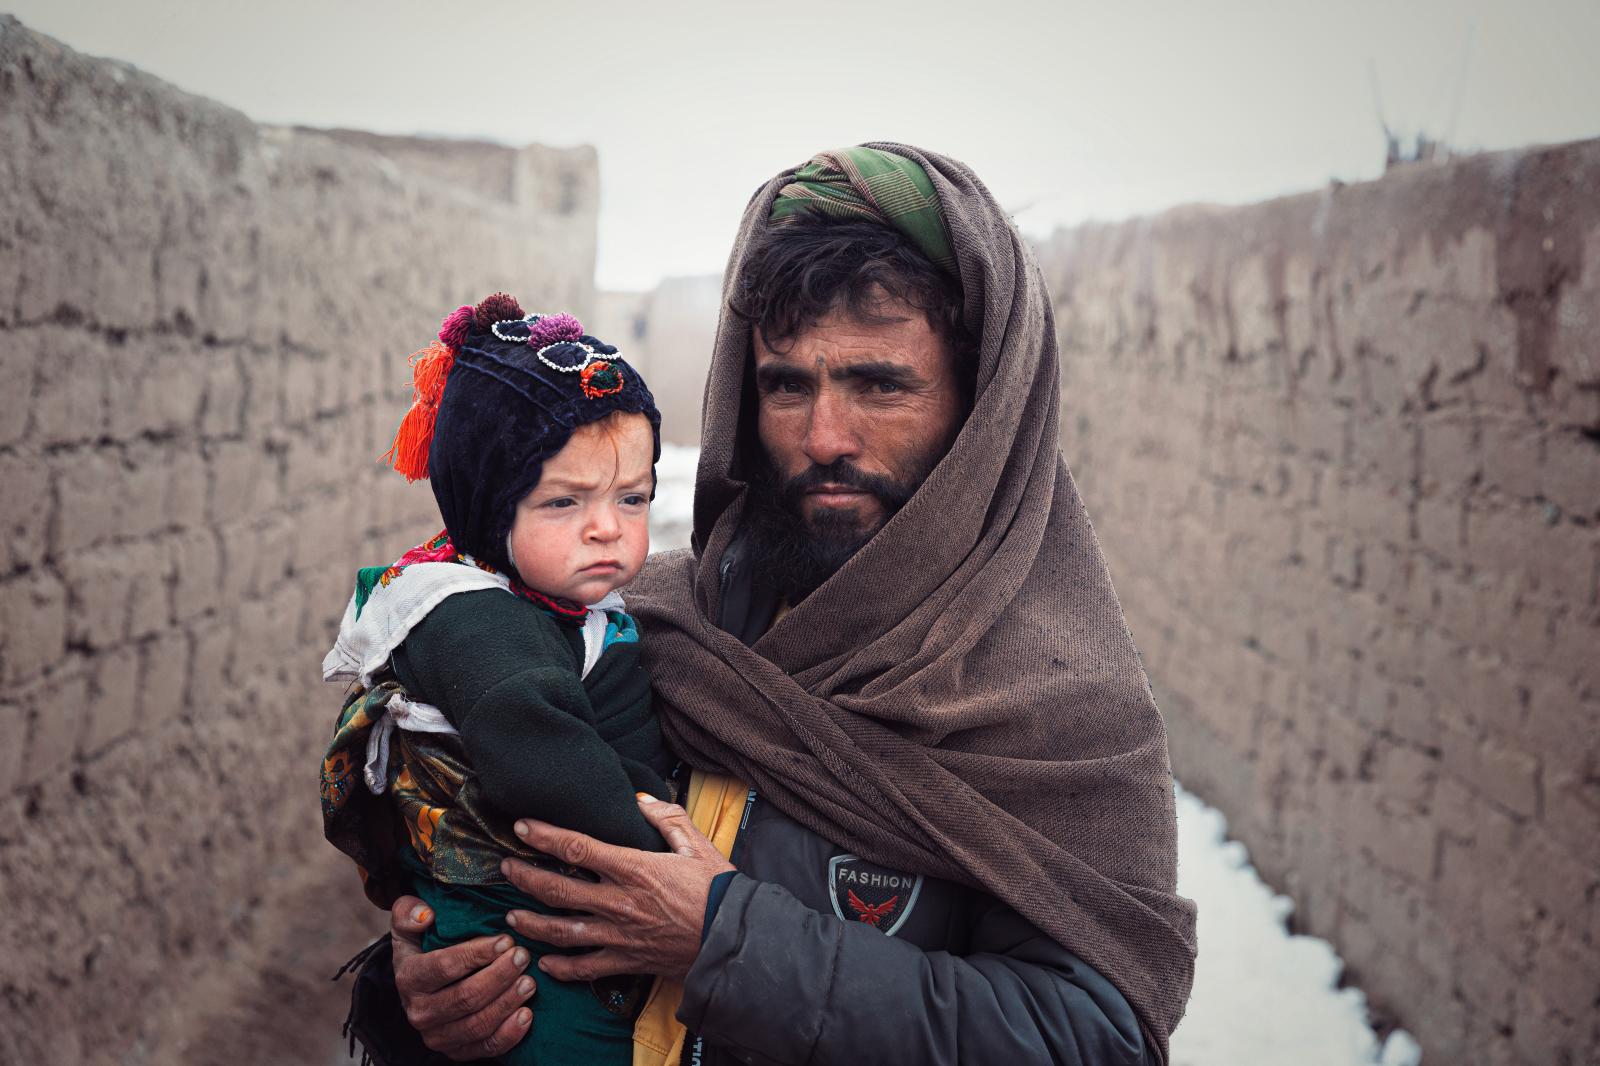 Two centuries of living with the people of Afghanistan